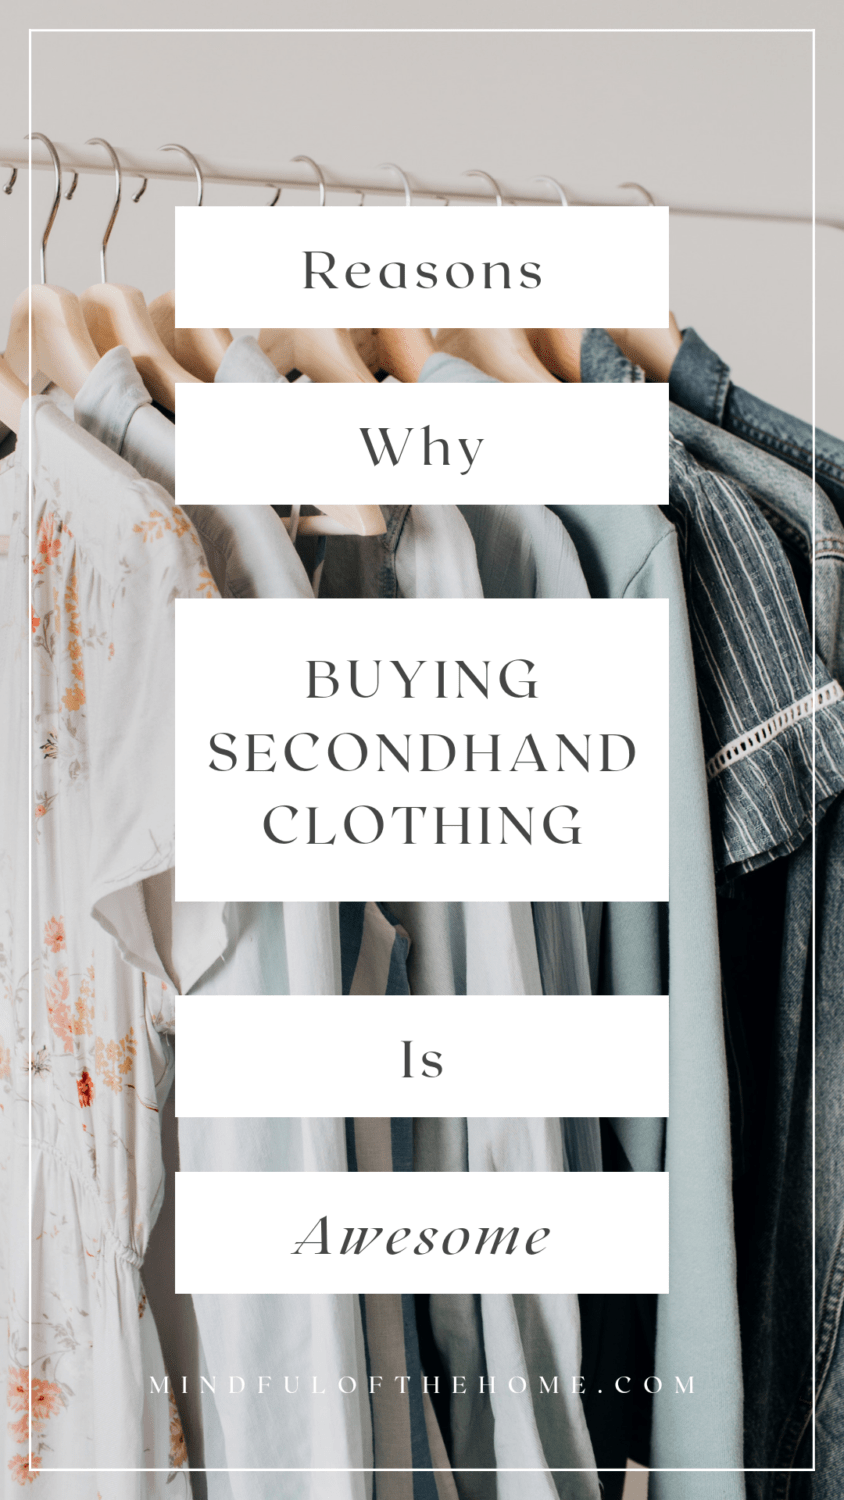 Benefits Of Buying Second-Hand Designer Clothes